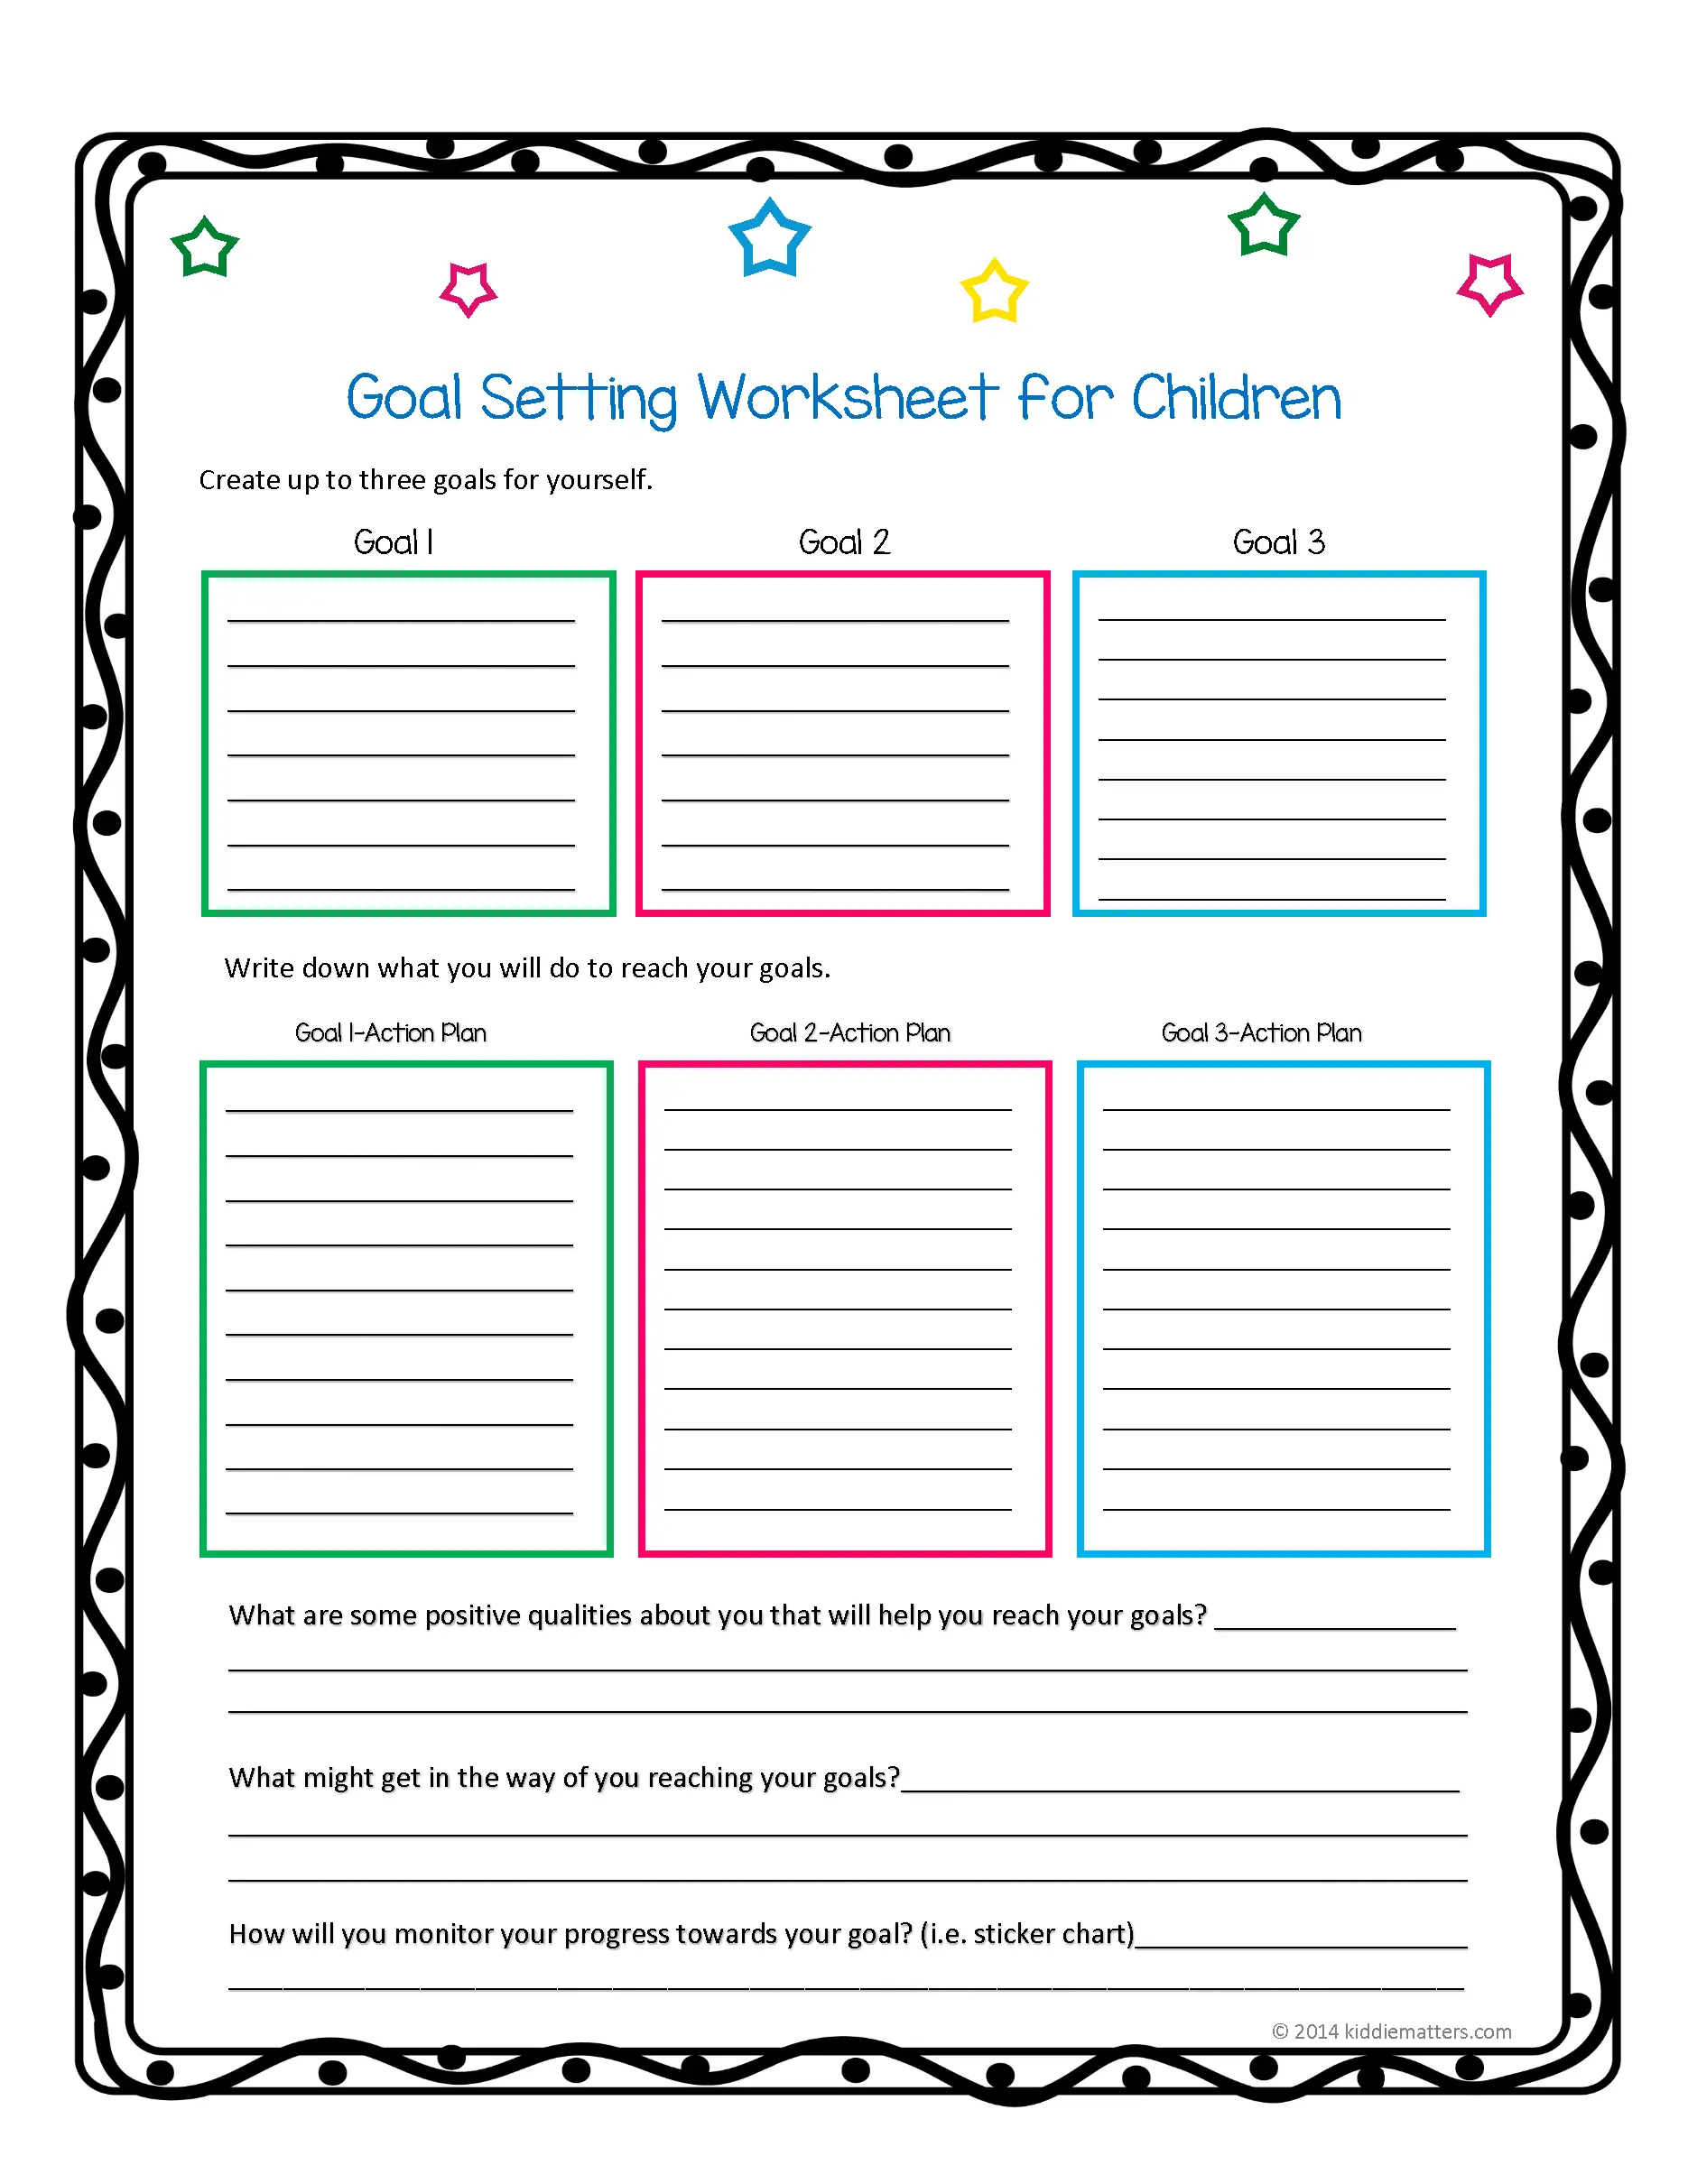 70-effective-goal-setting-worksheets-kitty-baby-love